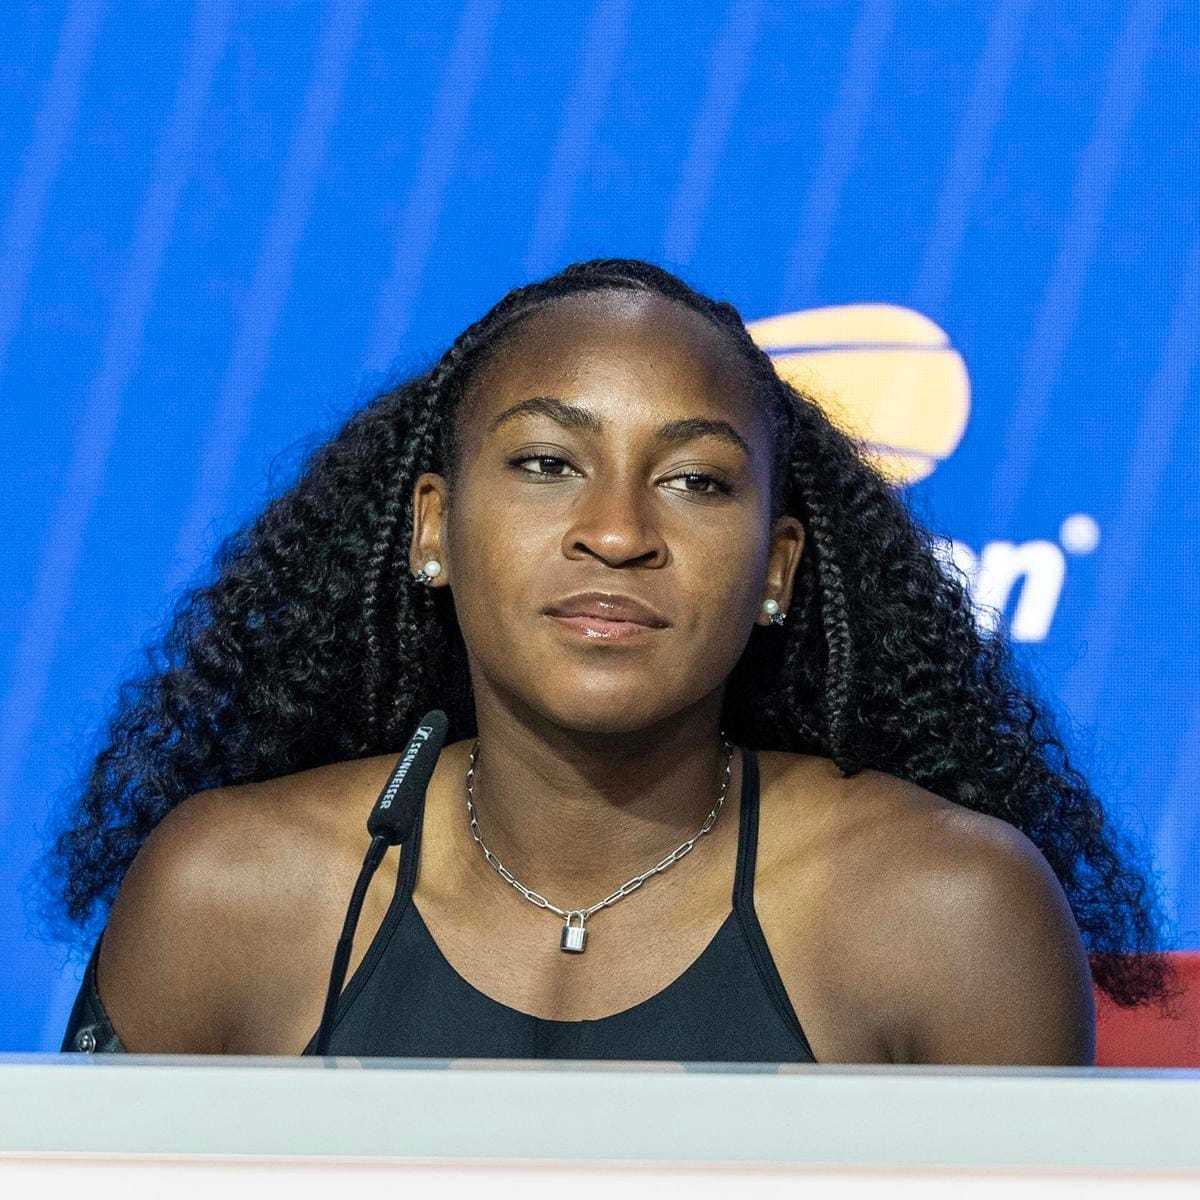 Coco Gauff of USA speaks to the press during US Open player